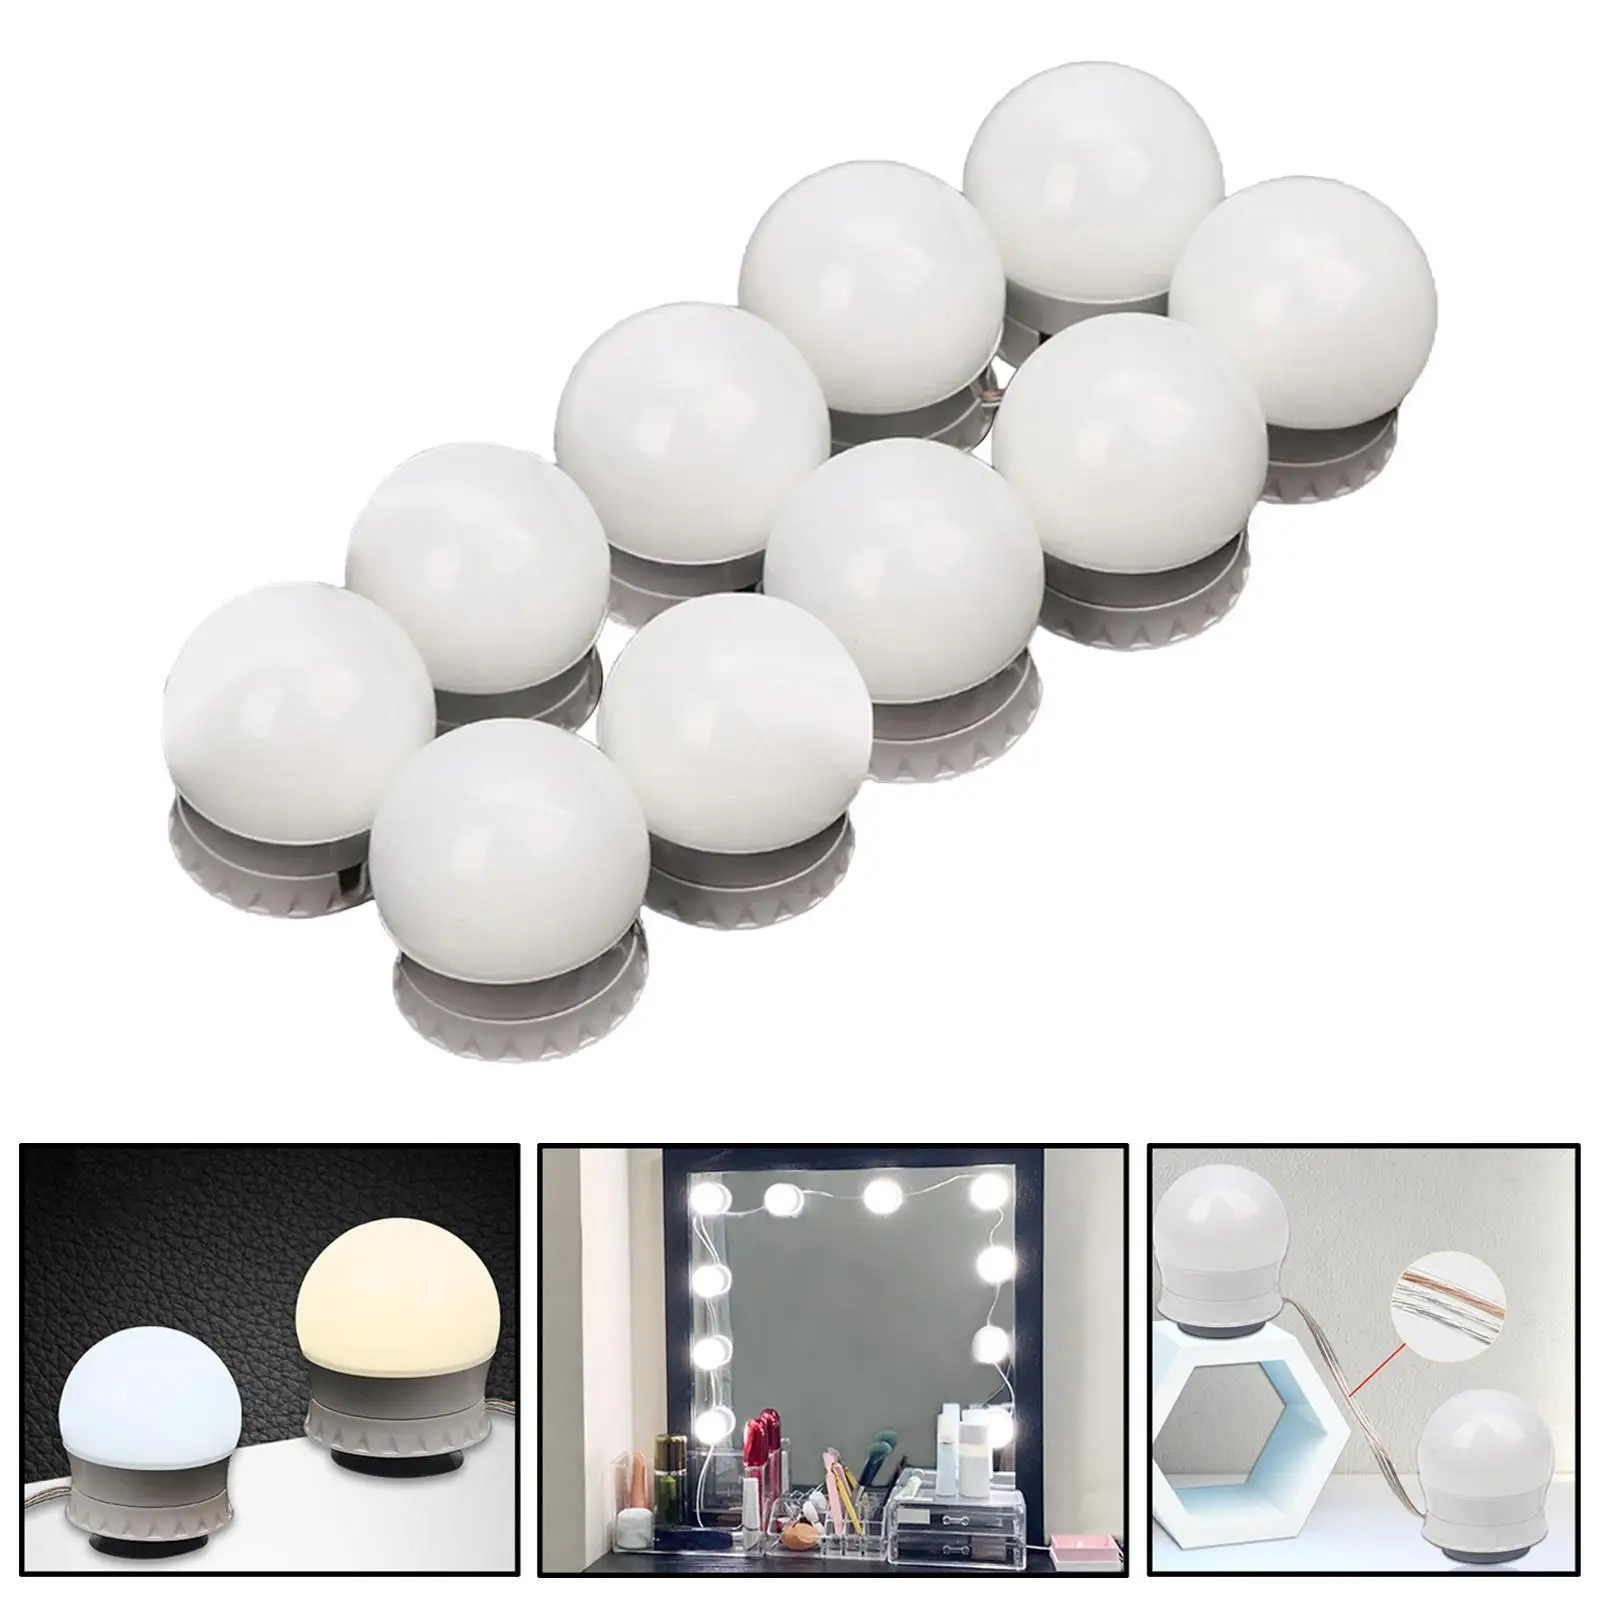 10 BulbLed Makeup Mirror Light Suction Cup Installation Dressing Table Vanity Light Bathroom Wall Lamp